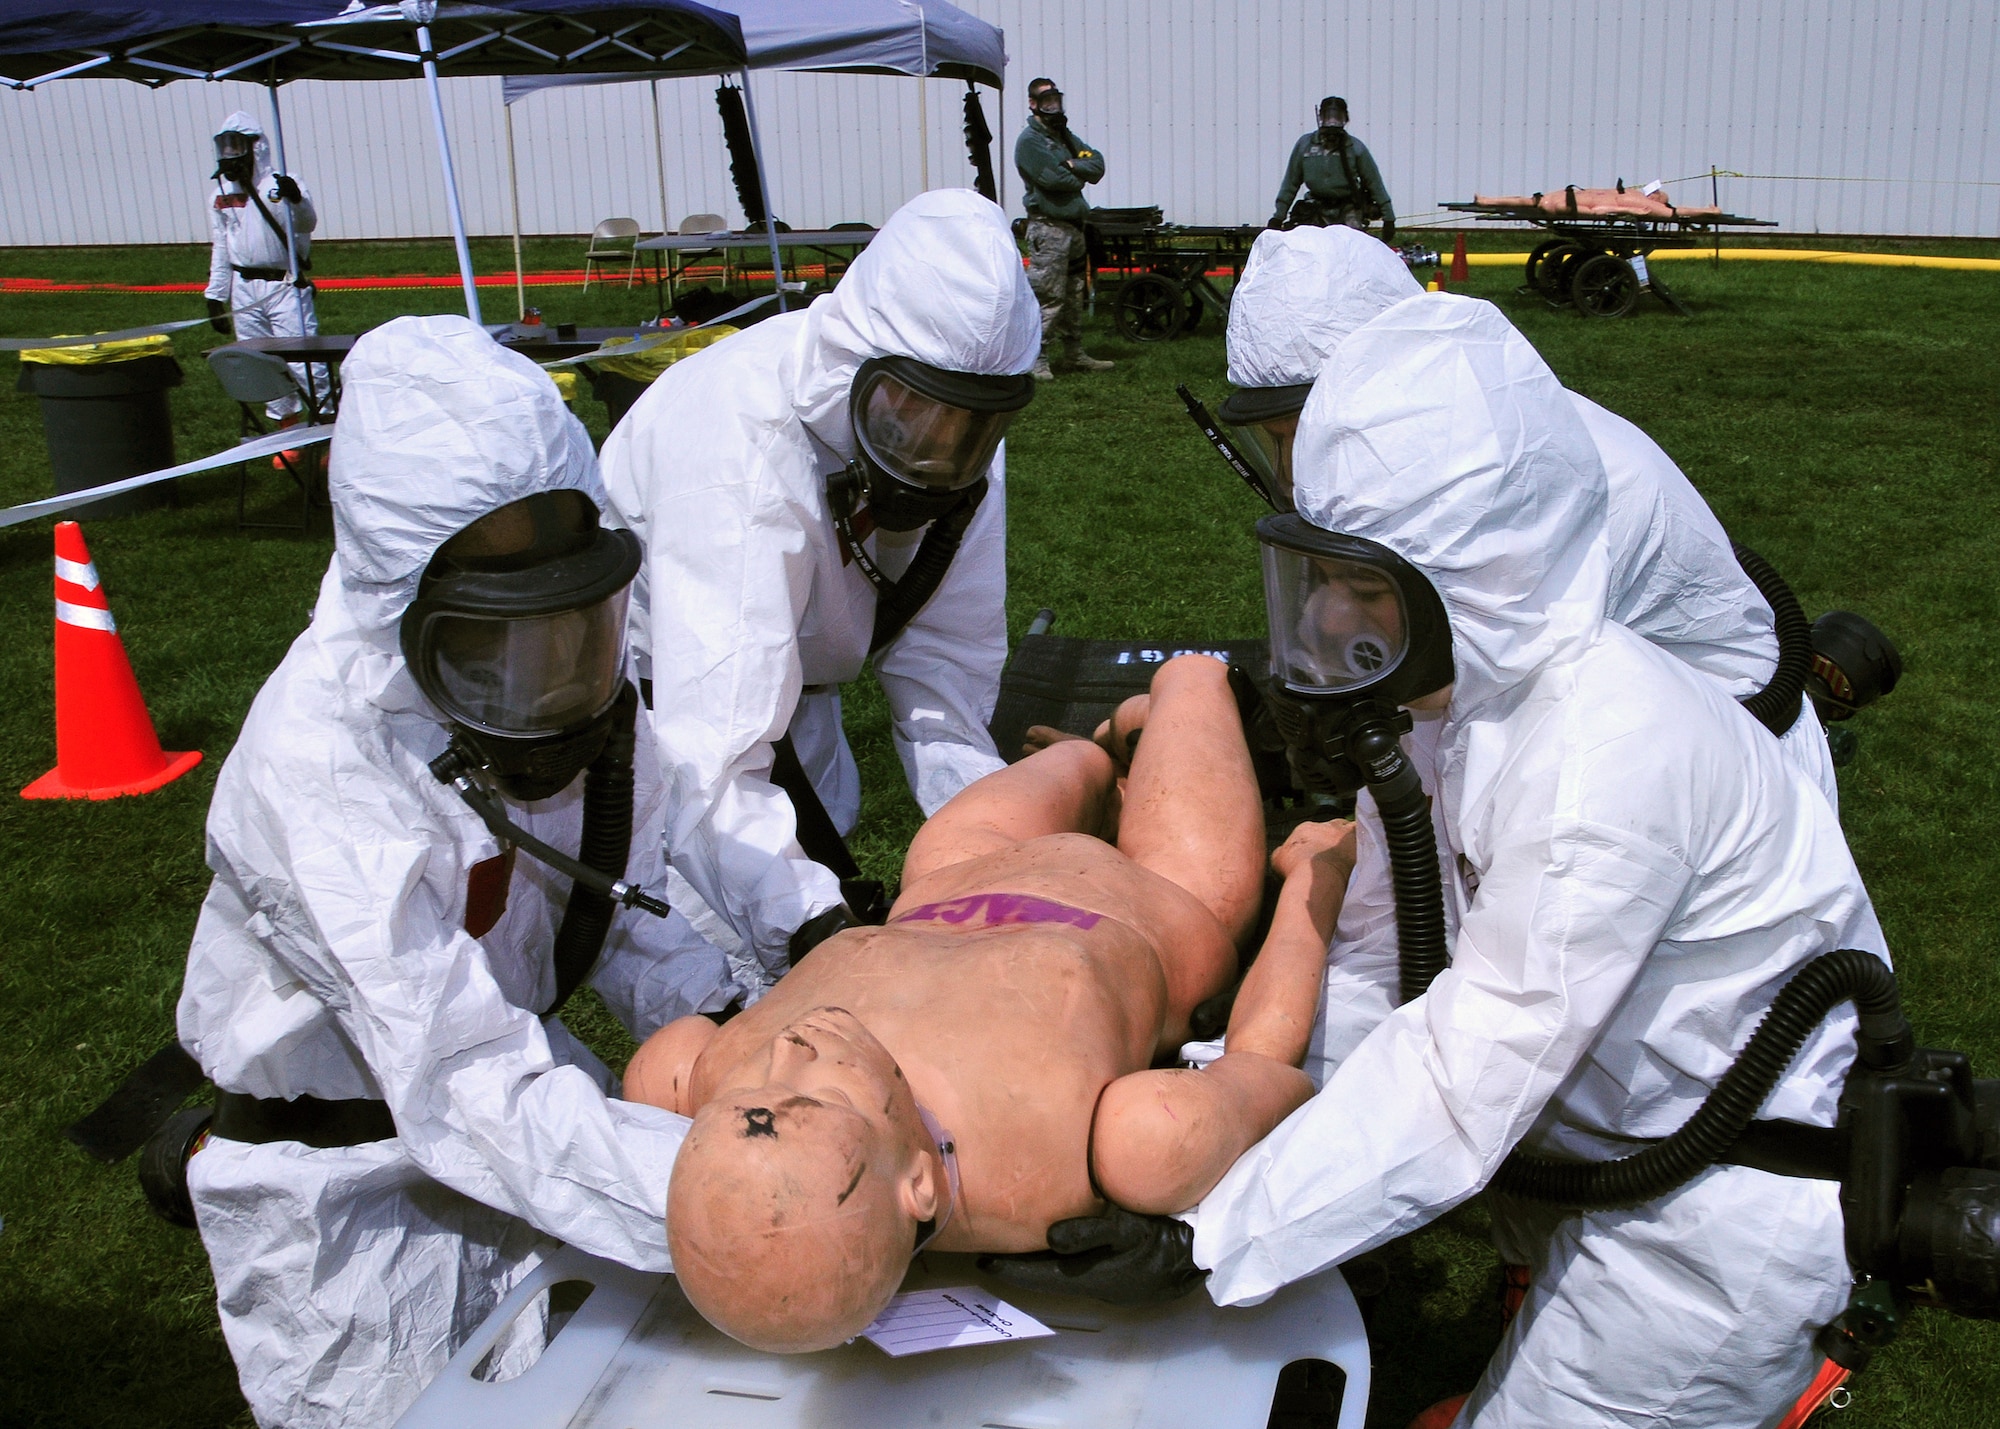 Wisconsin Army National Guard members perform mass decontamination of simulated casualties during an emergency preparedness exercise in Portage, Wisconsin, May 3, 2014. Columbia County Emergency Management, Divine Savior Hospital and the Wisconsin National Guard teamed up to practice the coordination and implementation of  their disaster response capabilities. (Air National Guard photo by Staff Sgt. Ryan Roth)